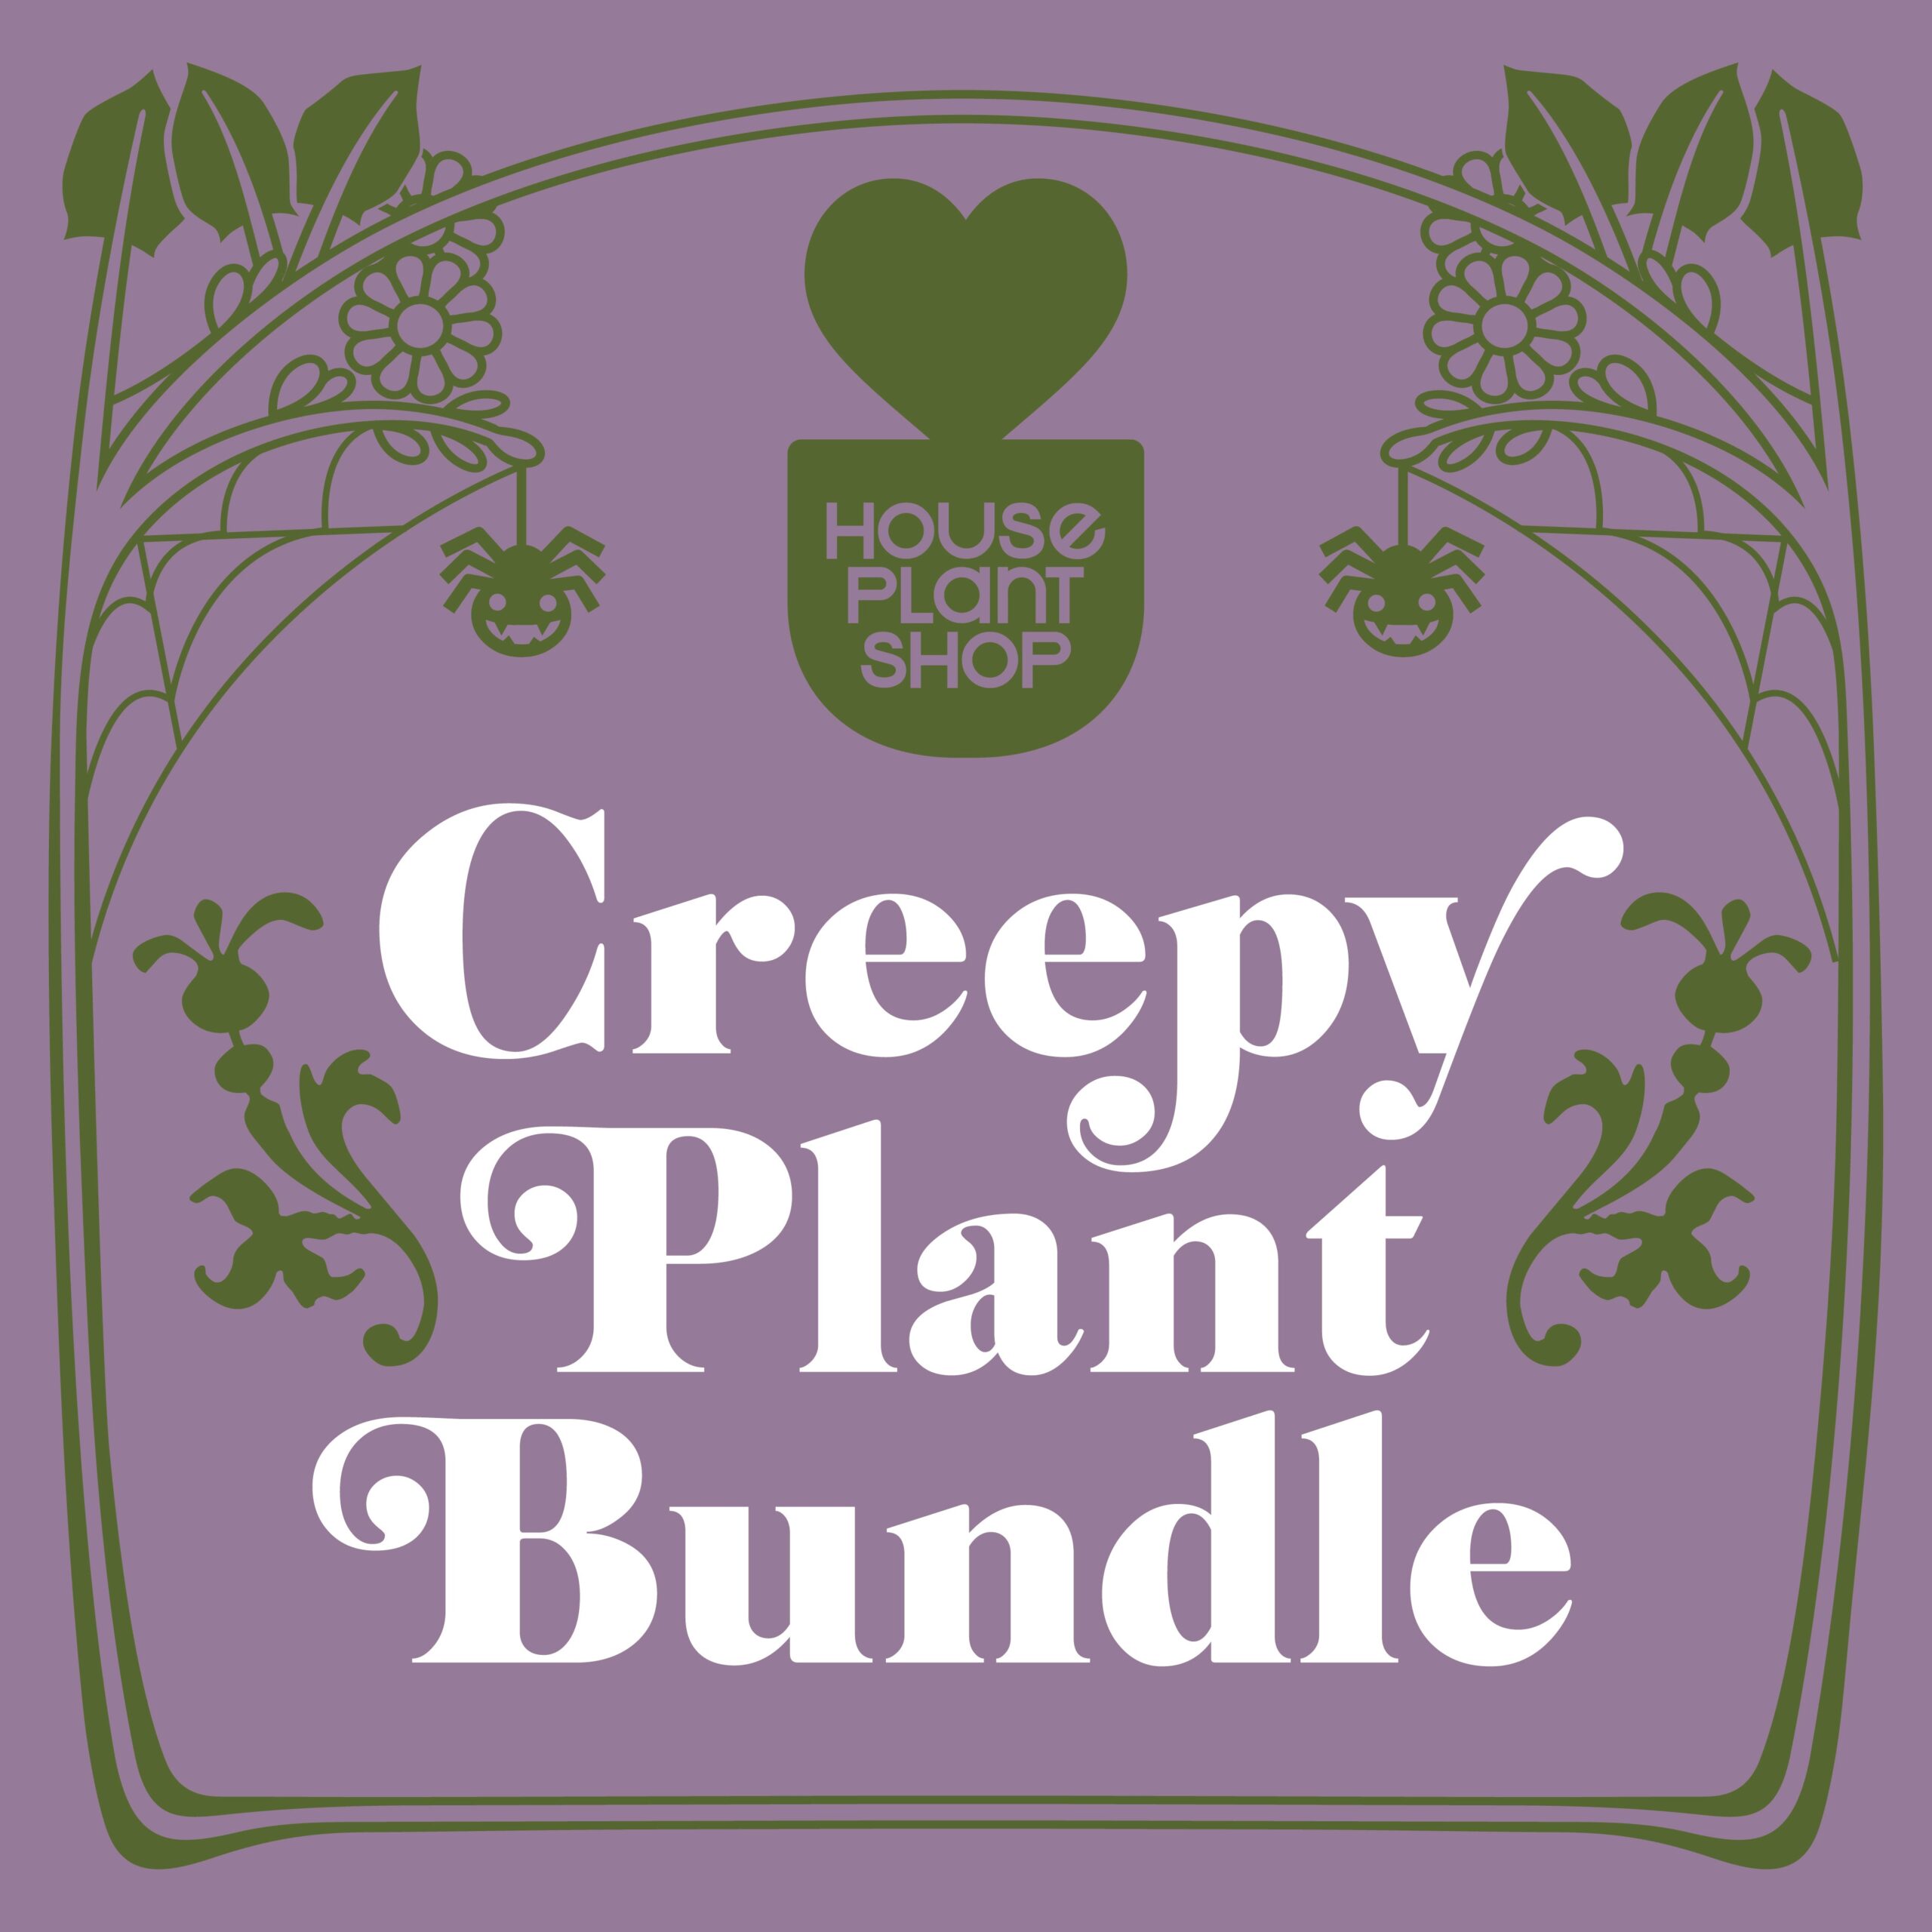 Creepy plant bundle available at the best garden center near me.